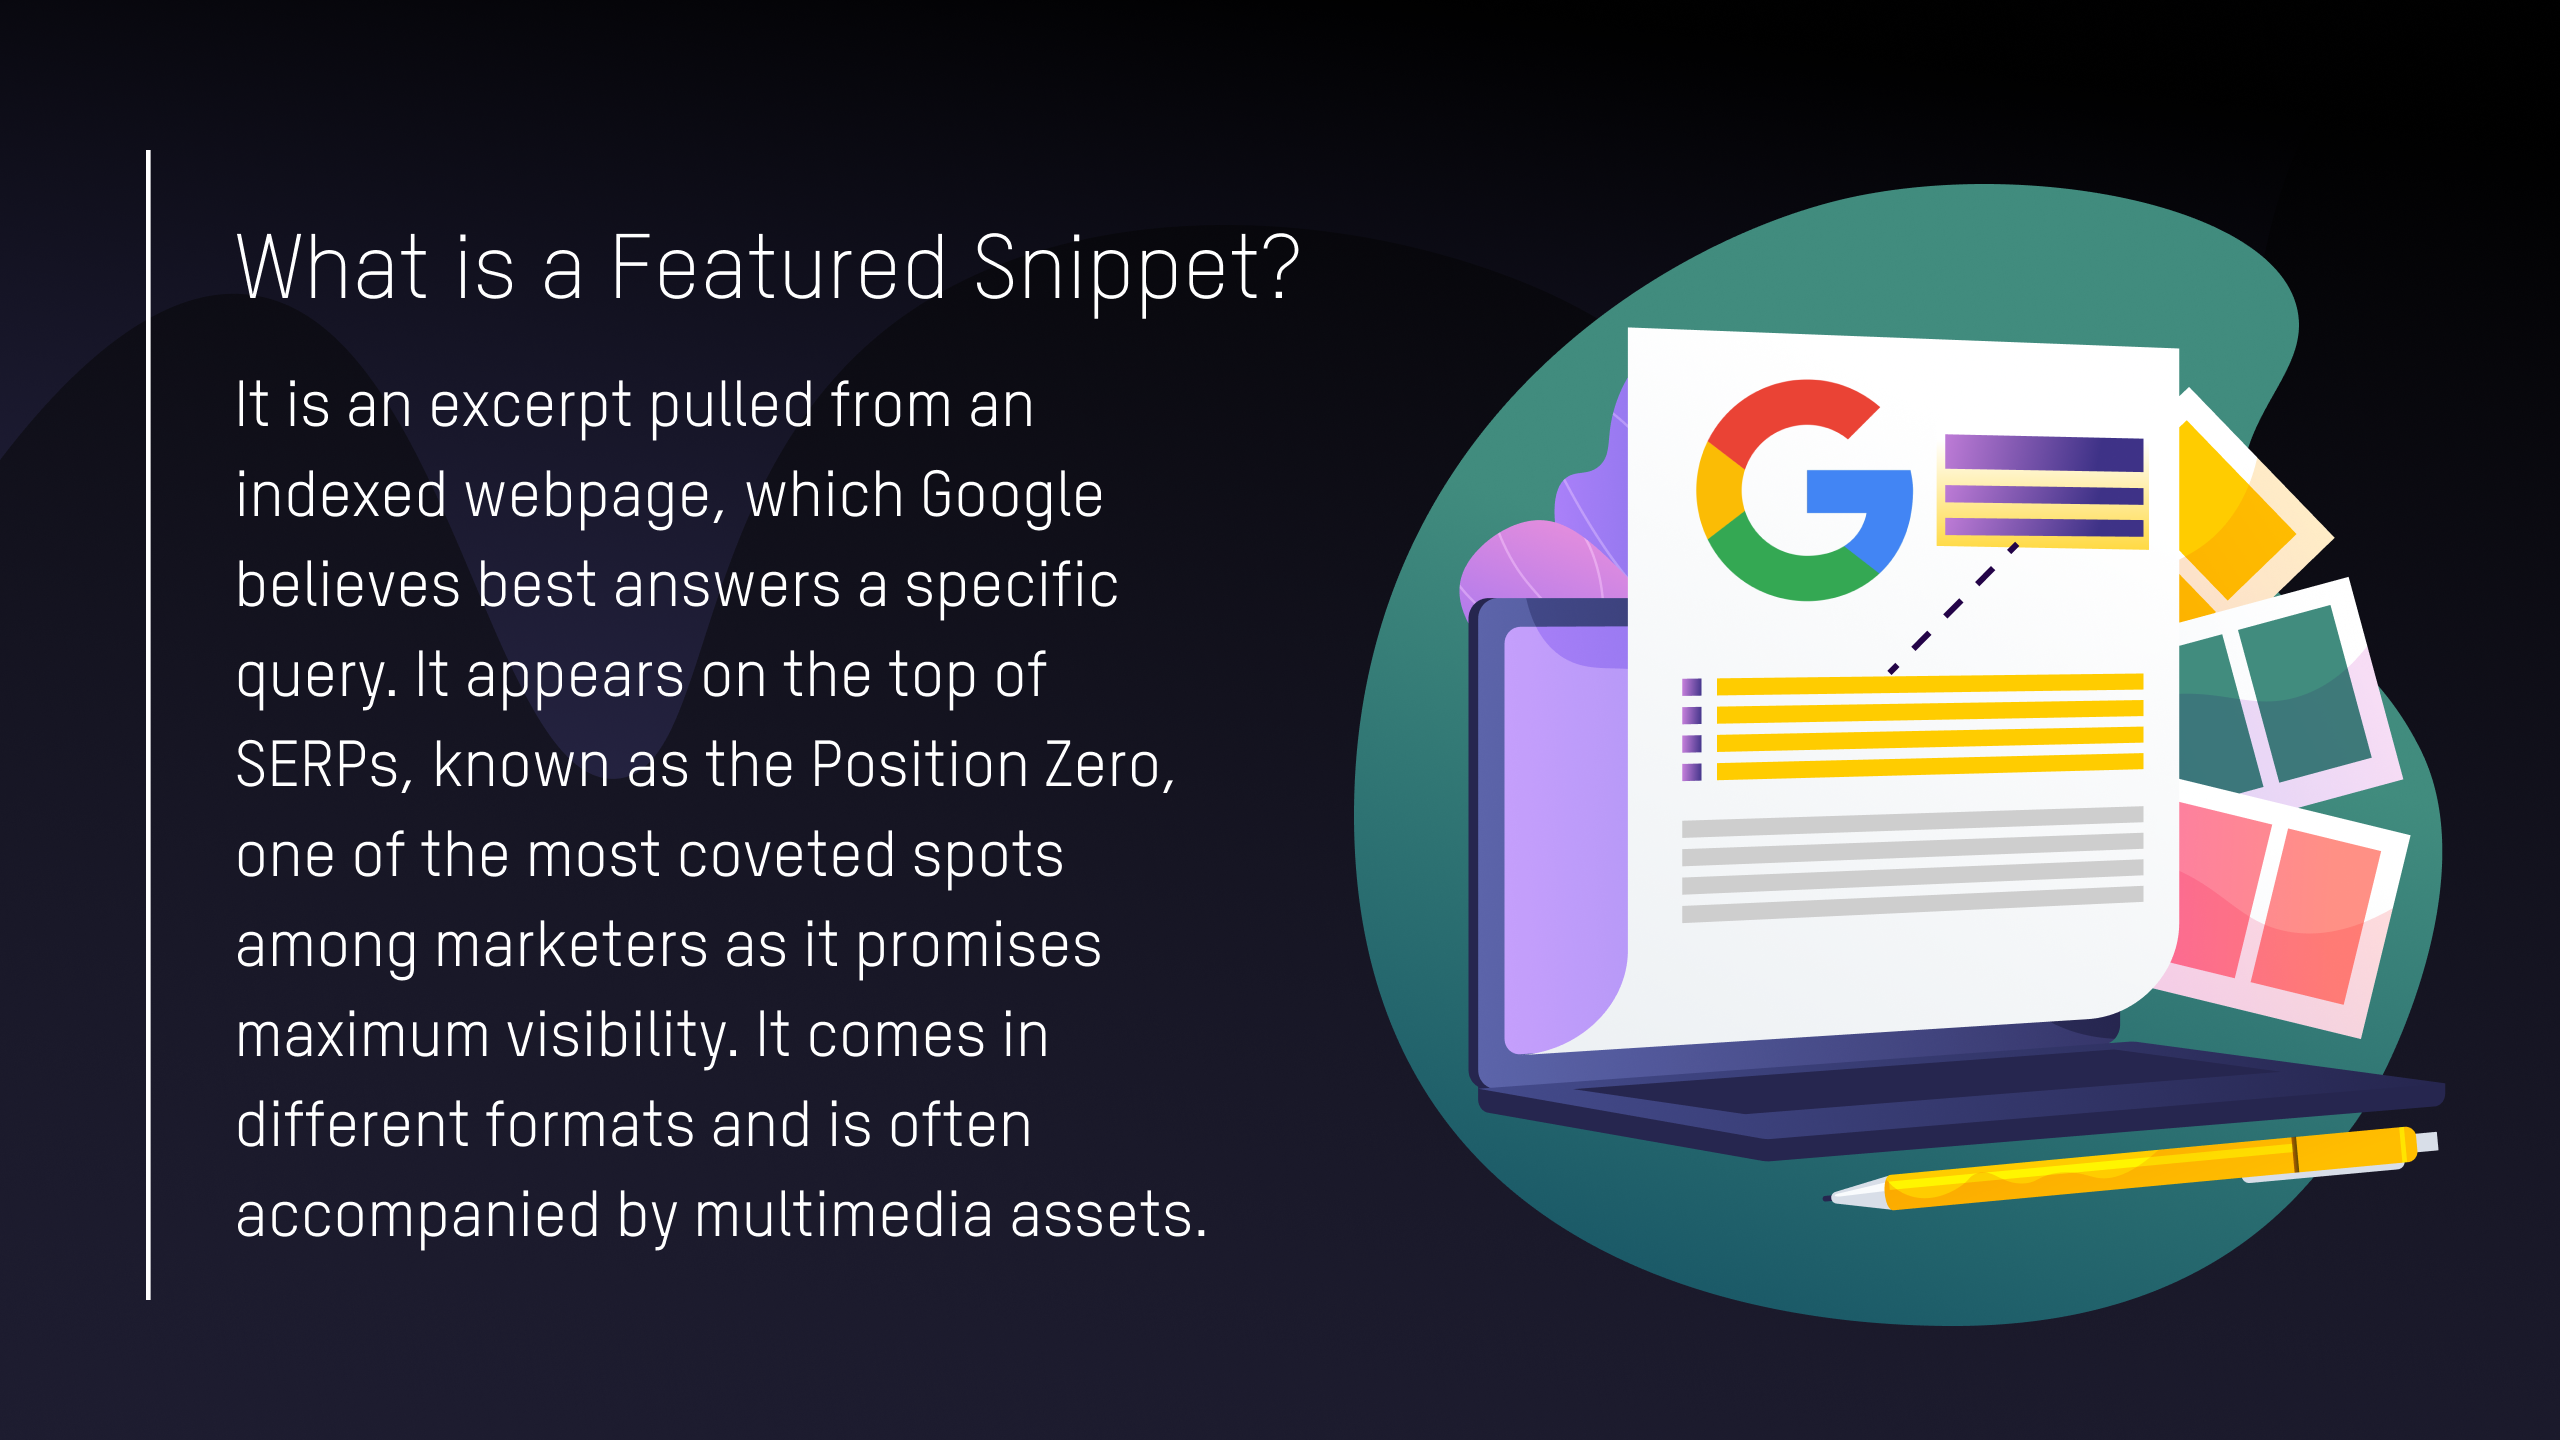 What is a featured snippet?